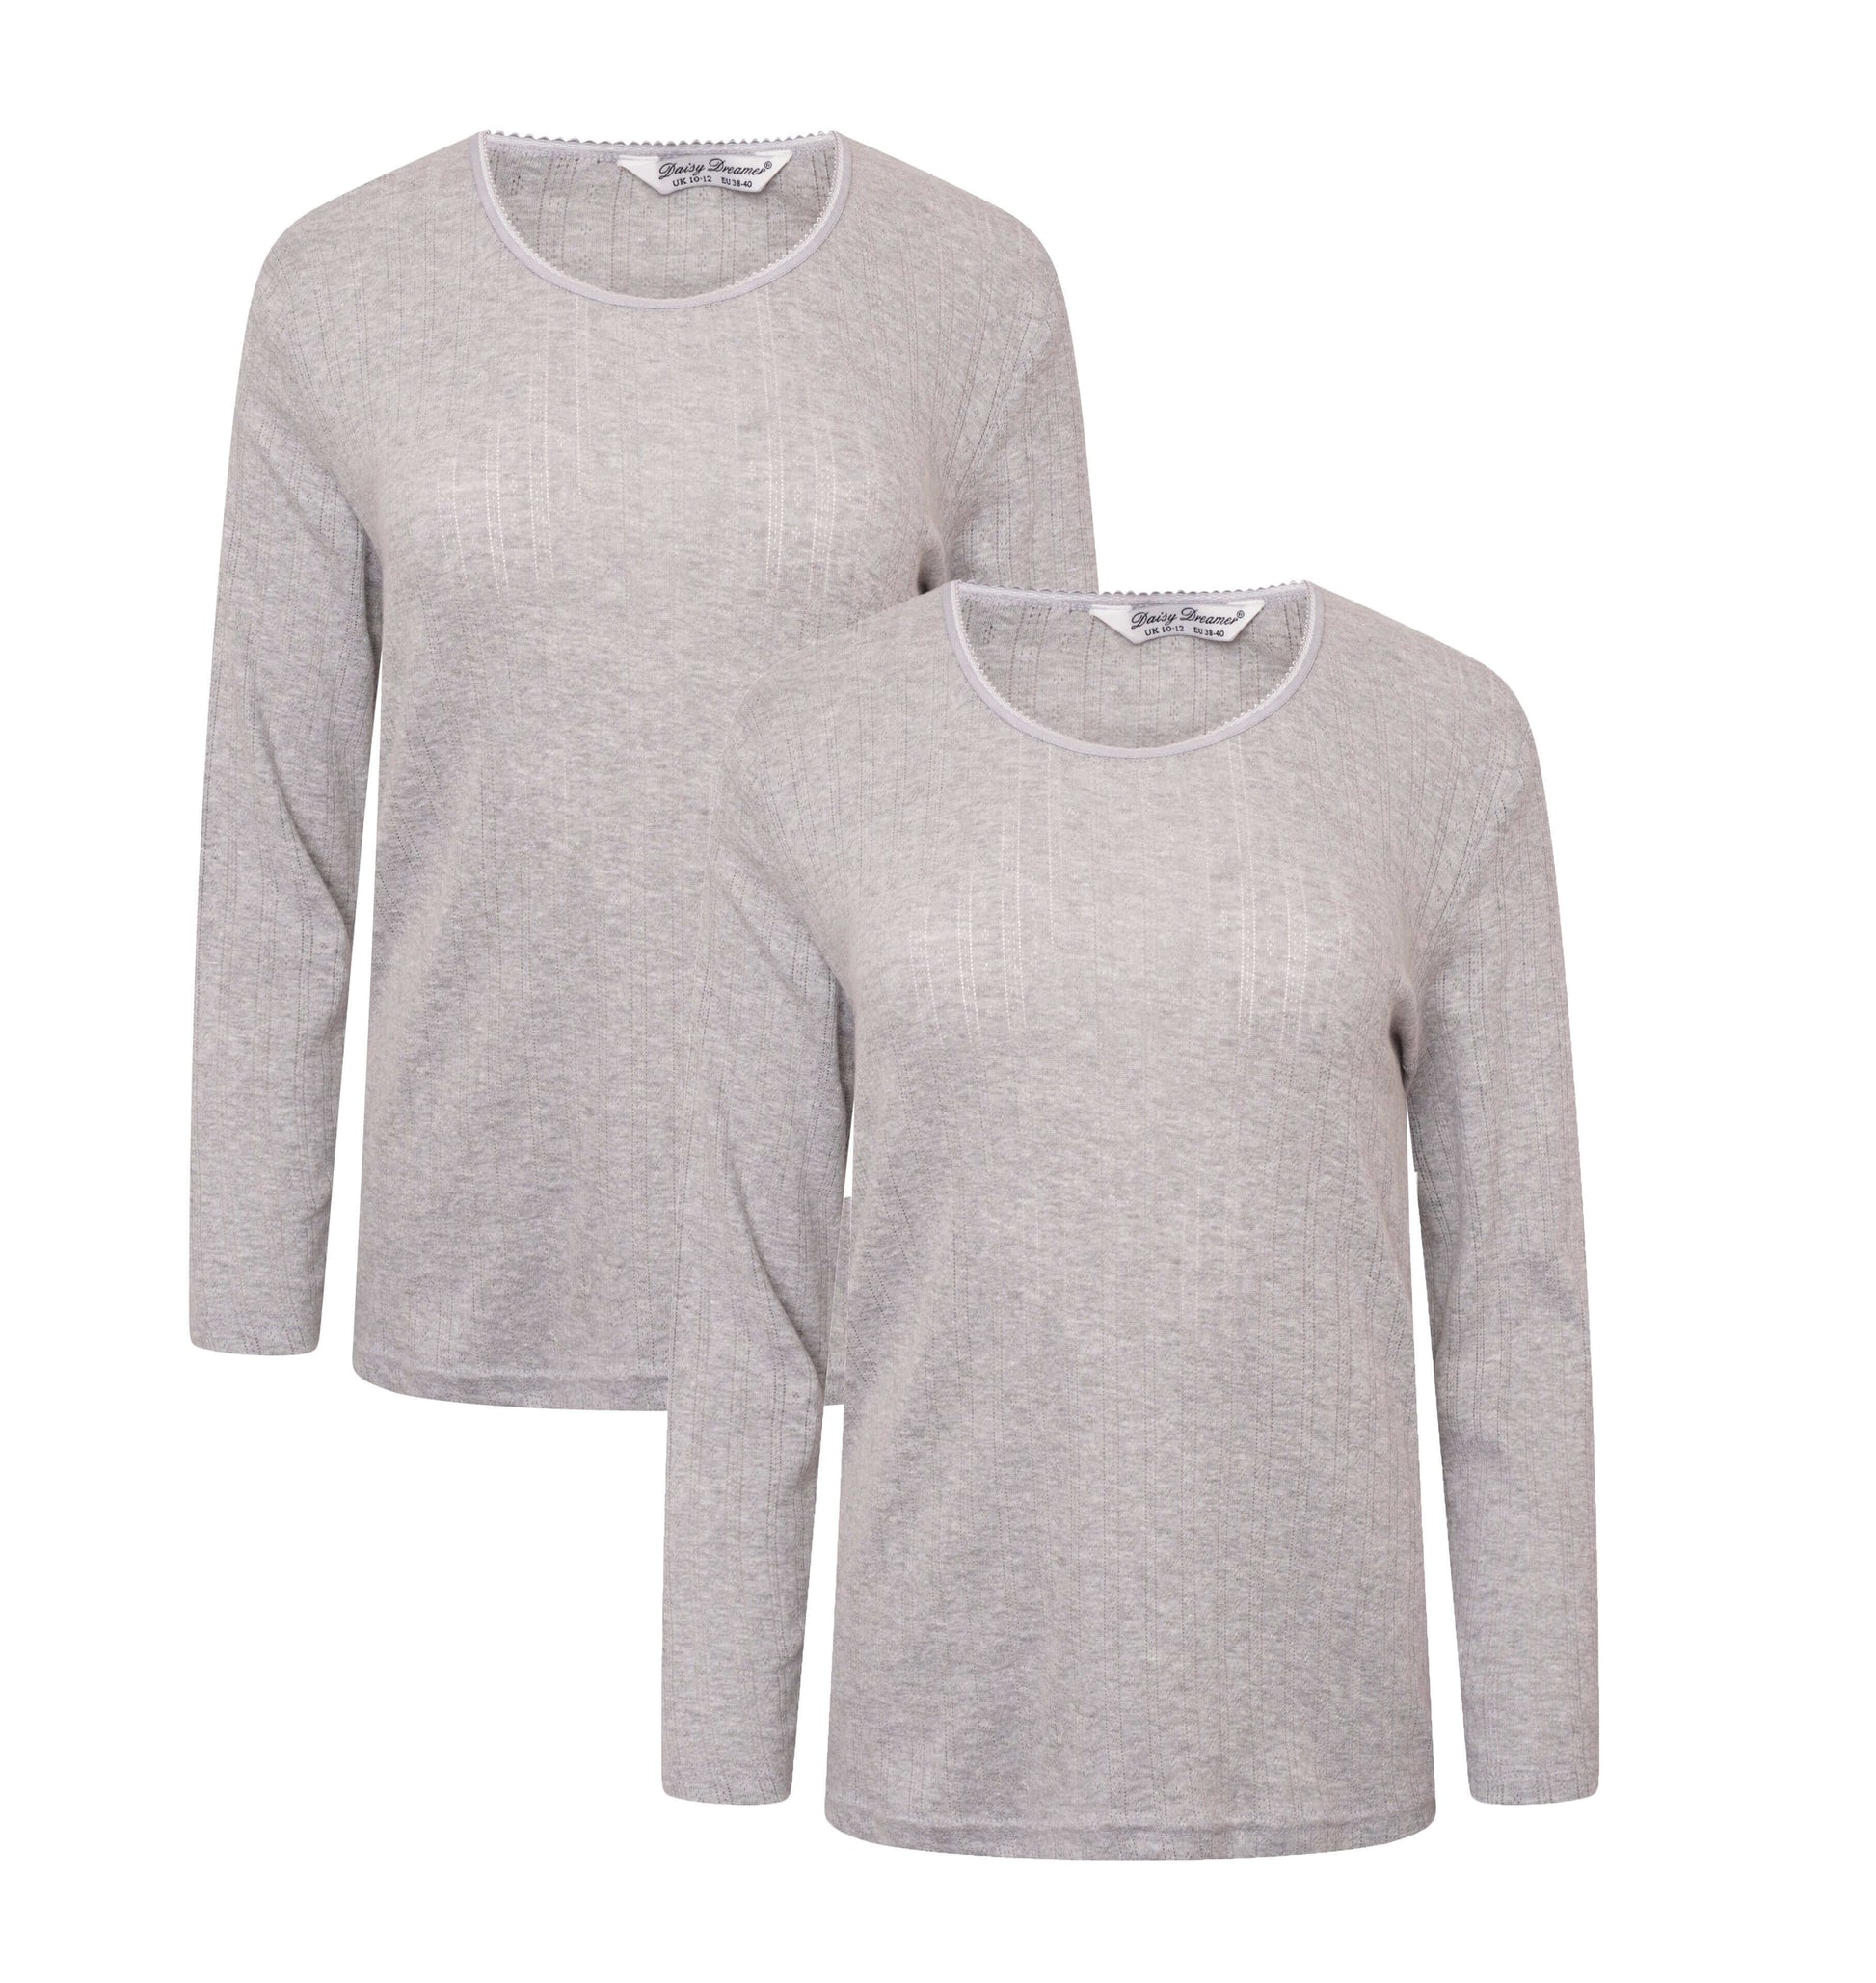 Heatwave® Pack Of 2 Women's Thermal Long Sleeve Top, Ladies Warm Winter Baselayer. Buy now for £10.00. A Thermal Underwear by Heatwave Thermalwear. baselayer, black, daisy dreamer, grey, heatwave, hiking, long sleeve, outdoor, pants, skiing, sports, therm